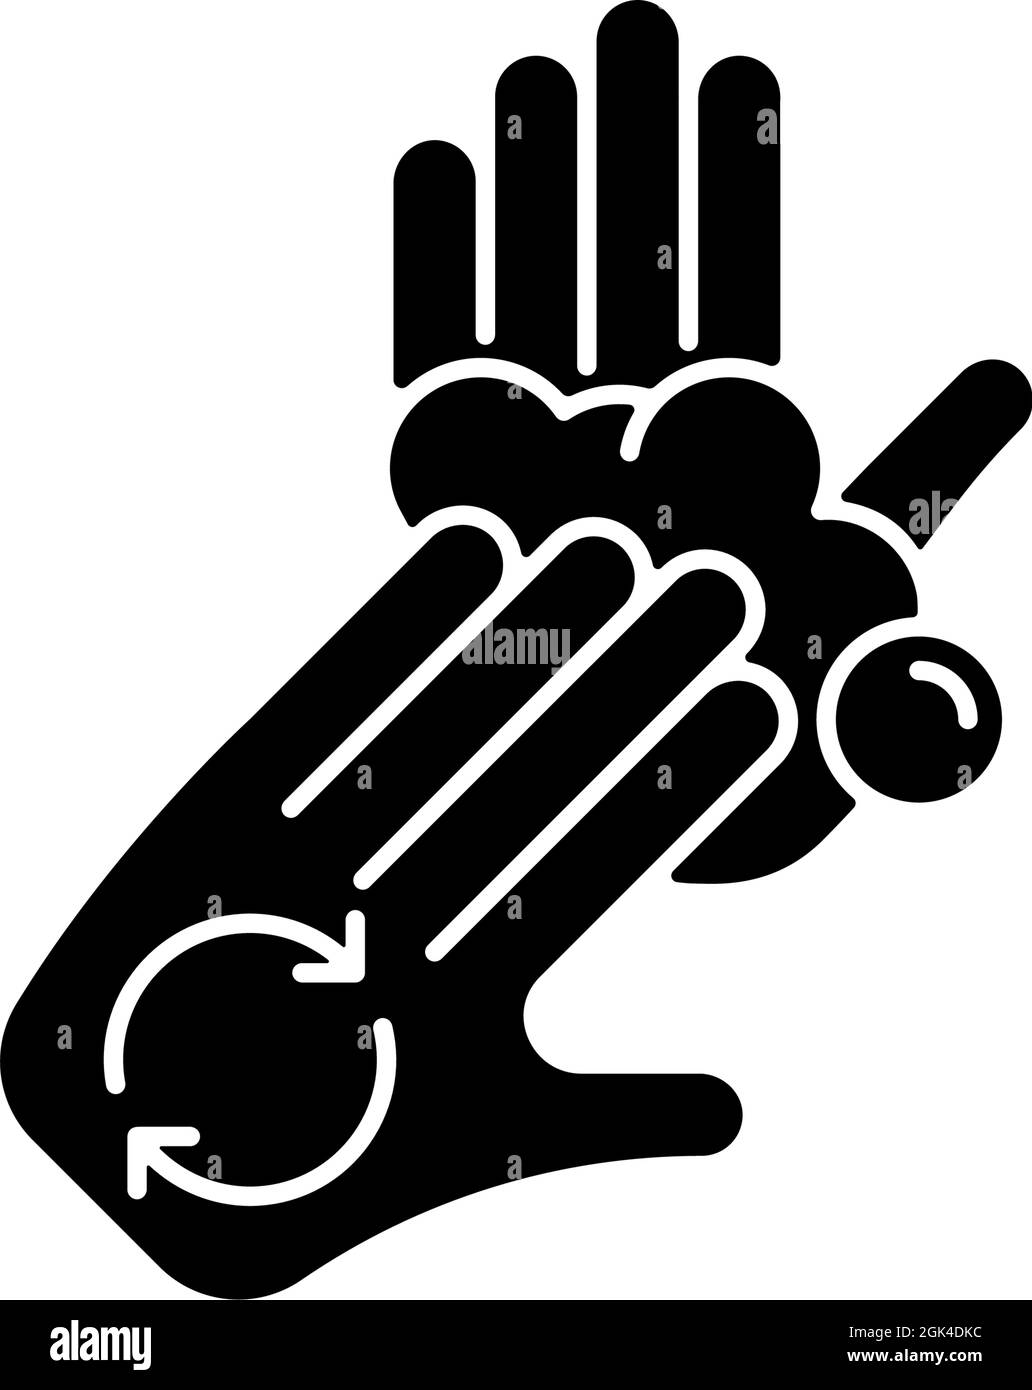 Rub palms with fingers black glyph icon Stock Vector